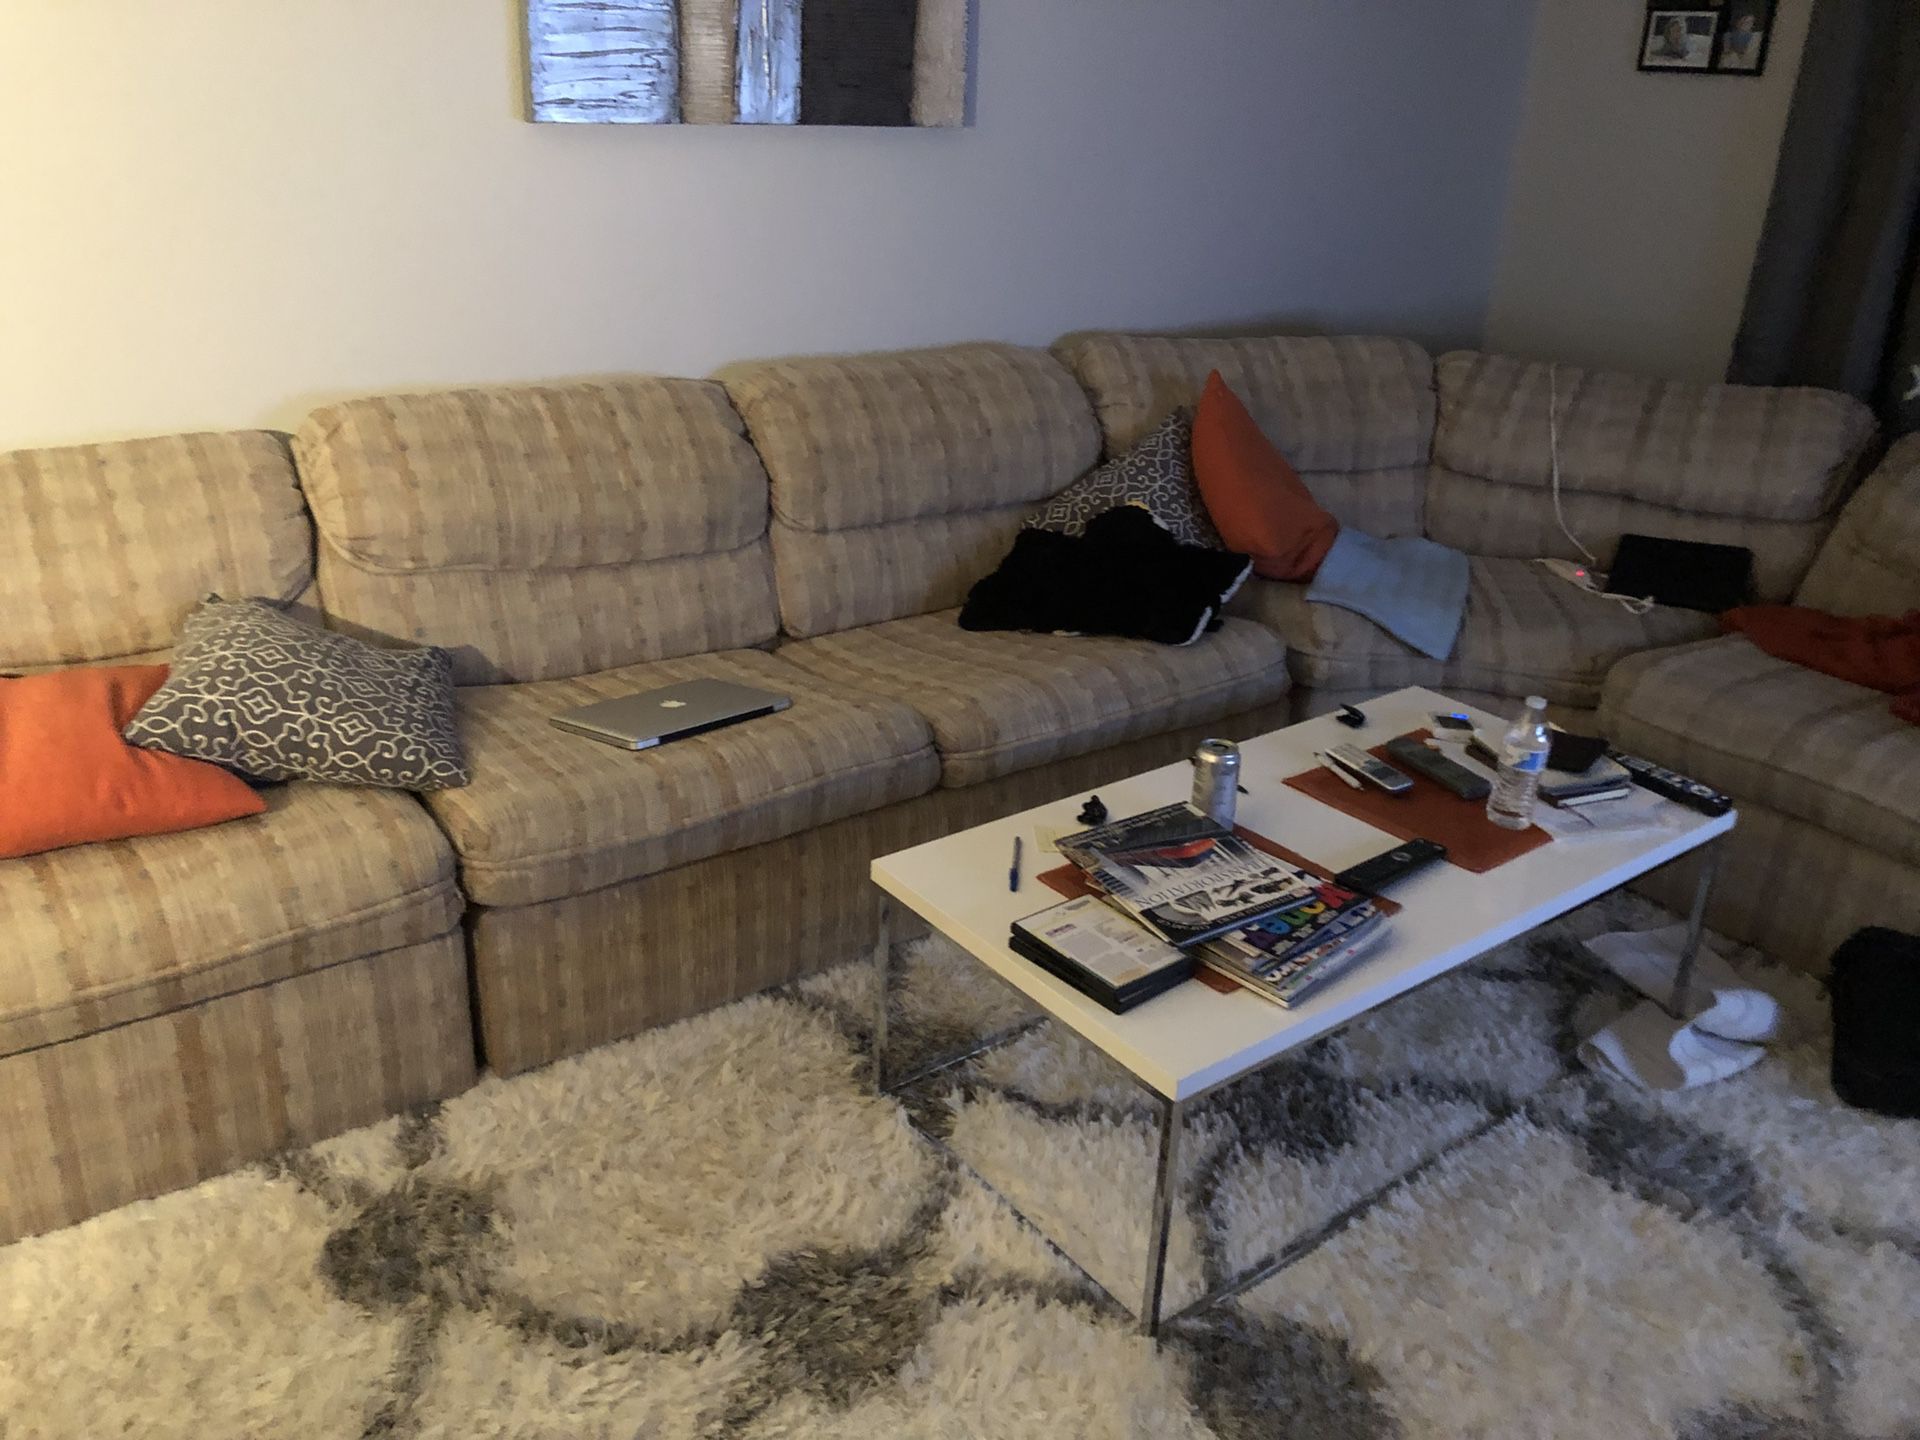 Sectional couch for free it pulls out as a bed and has two recliners on the side seats